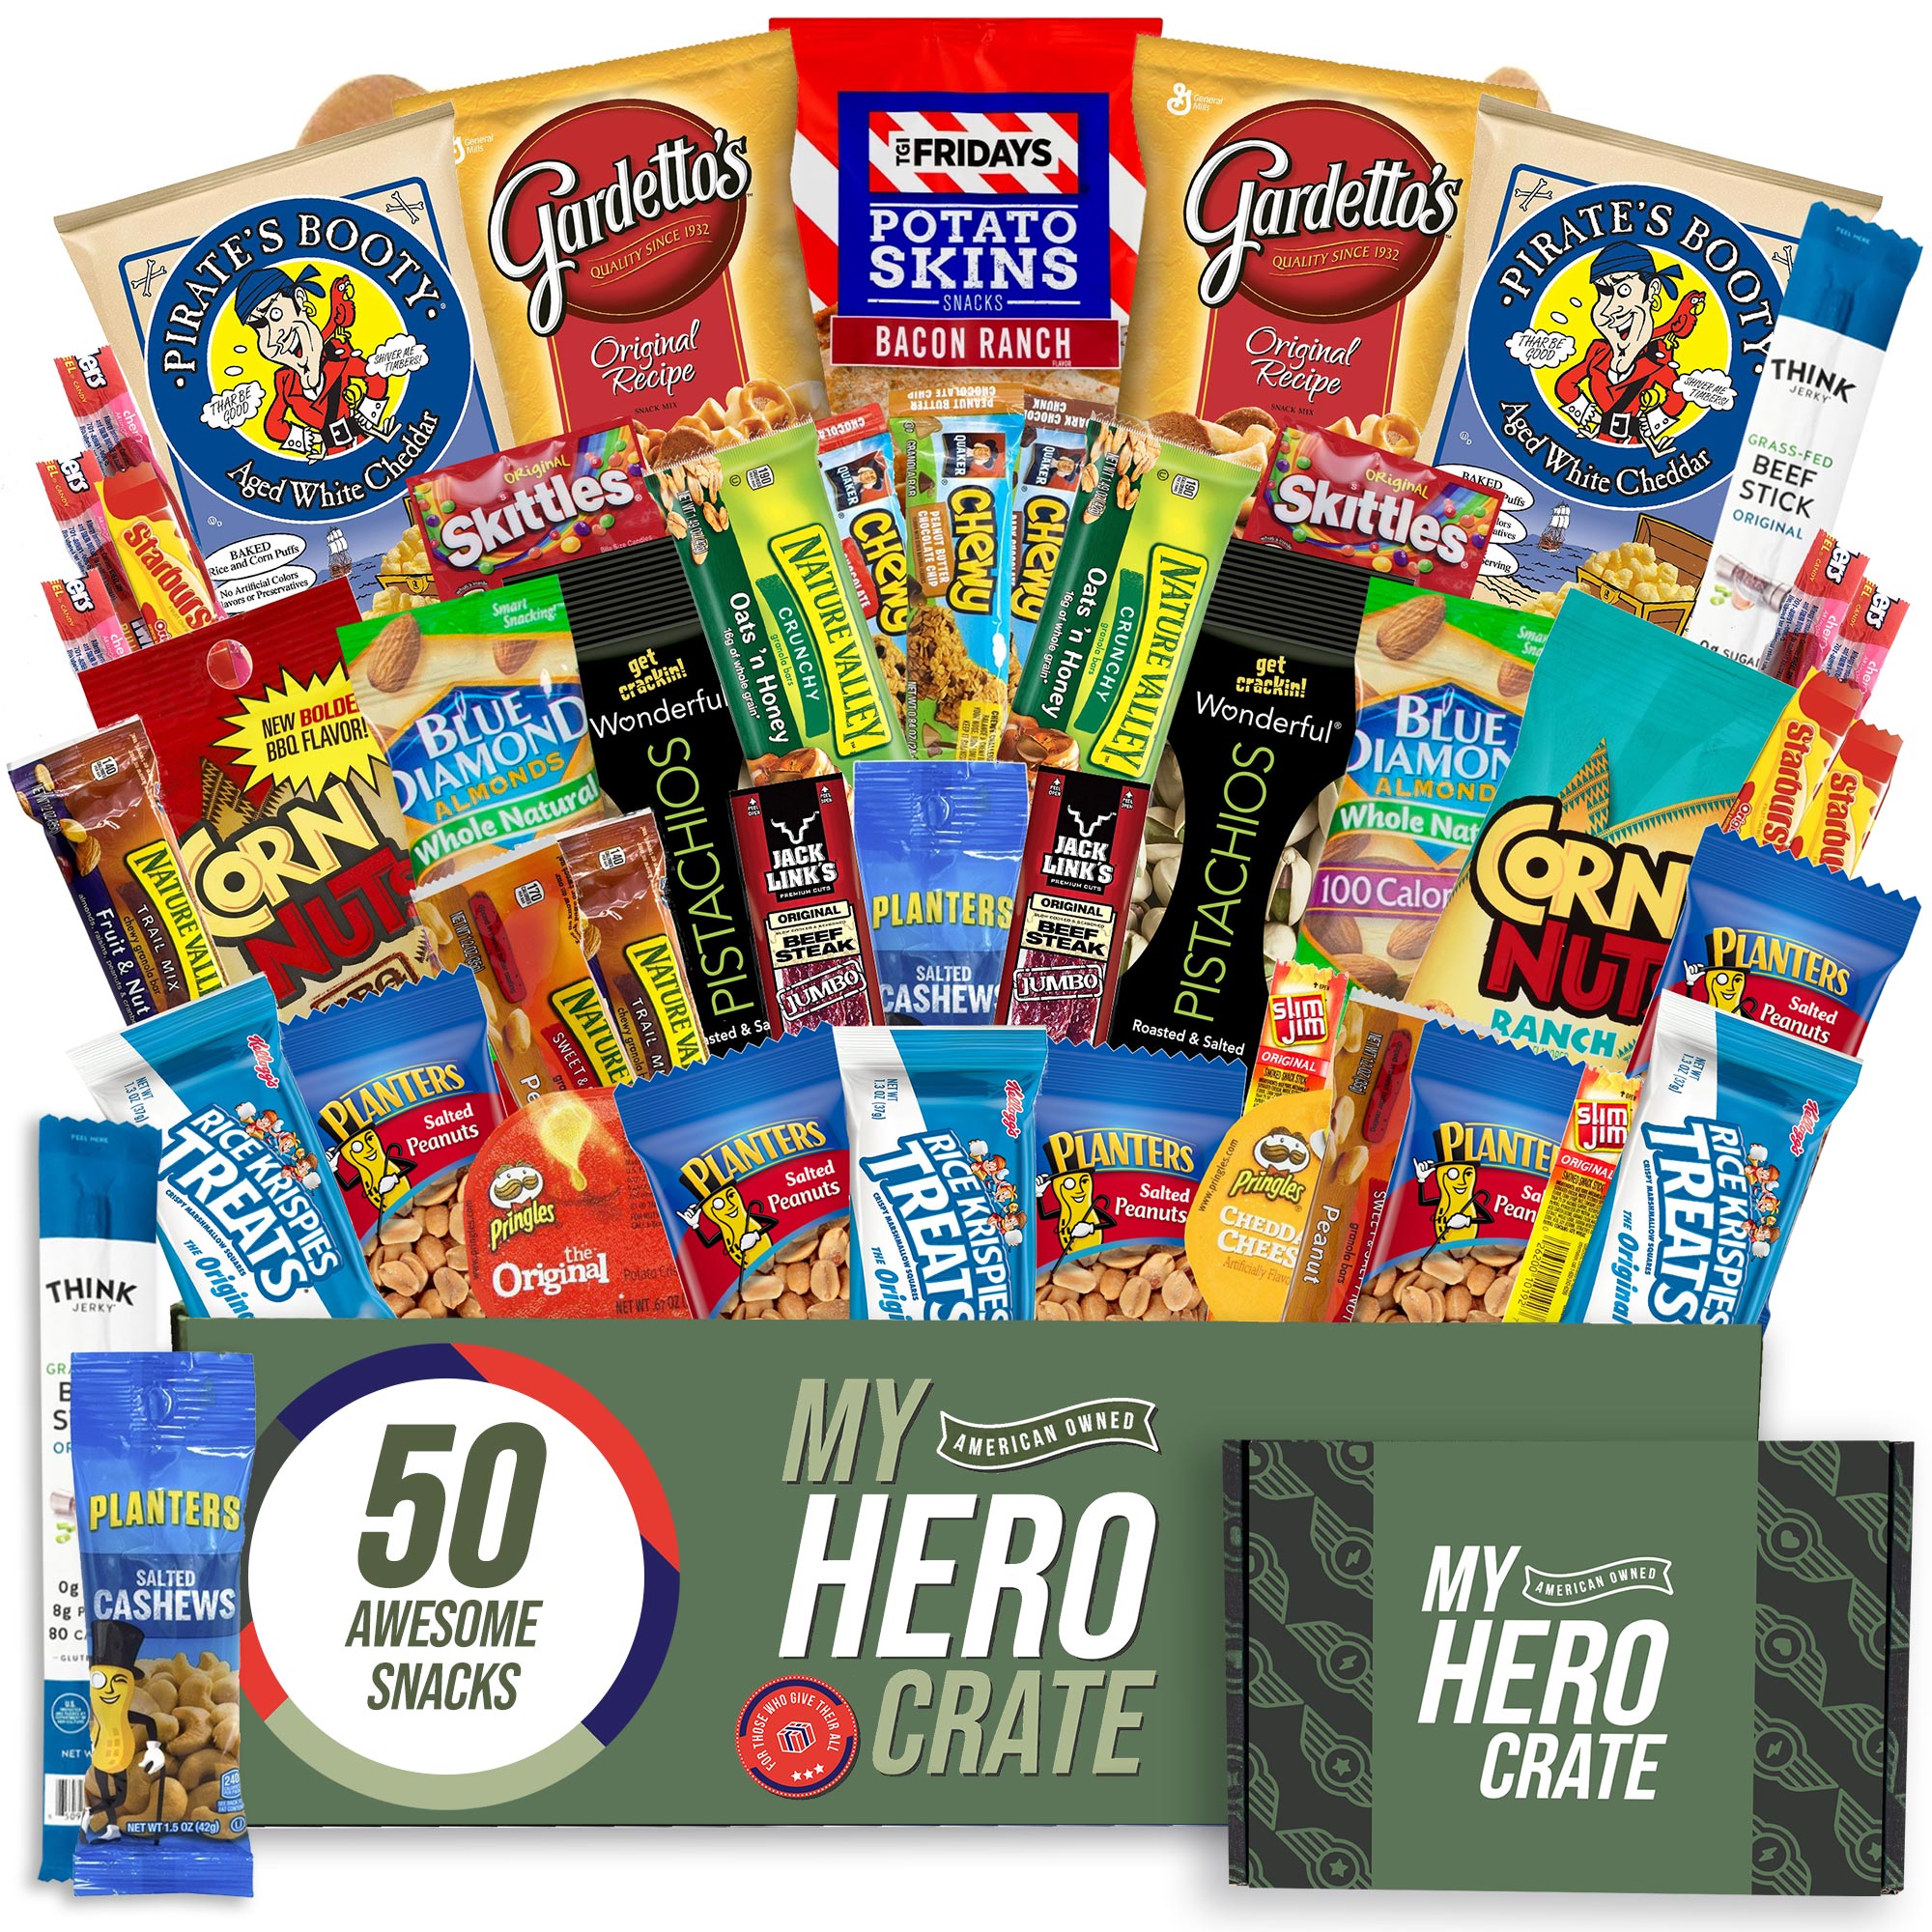 My Hero Crate Military Care Package - 50 Pcs Snack Box Gift Basket - Variety Pack with Chips, Candy, Pirate Booty, Nuts and More - image 1 of 4